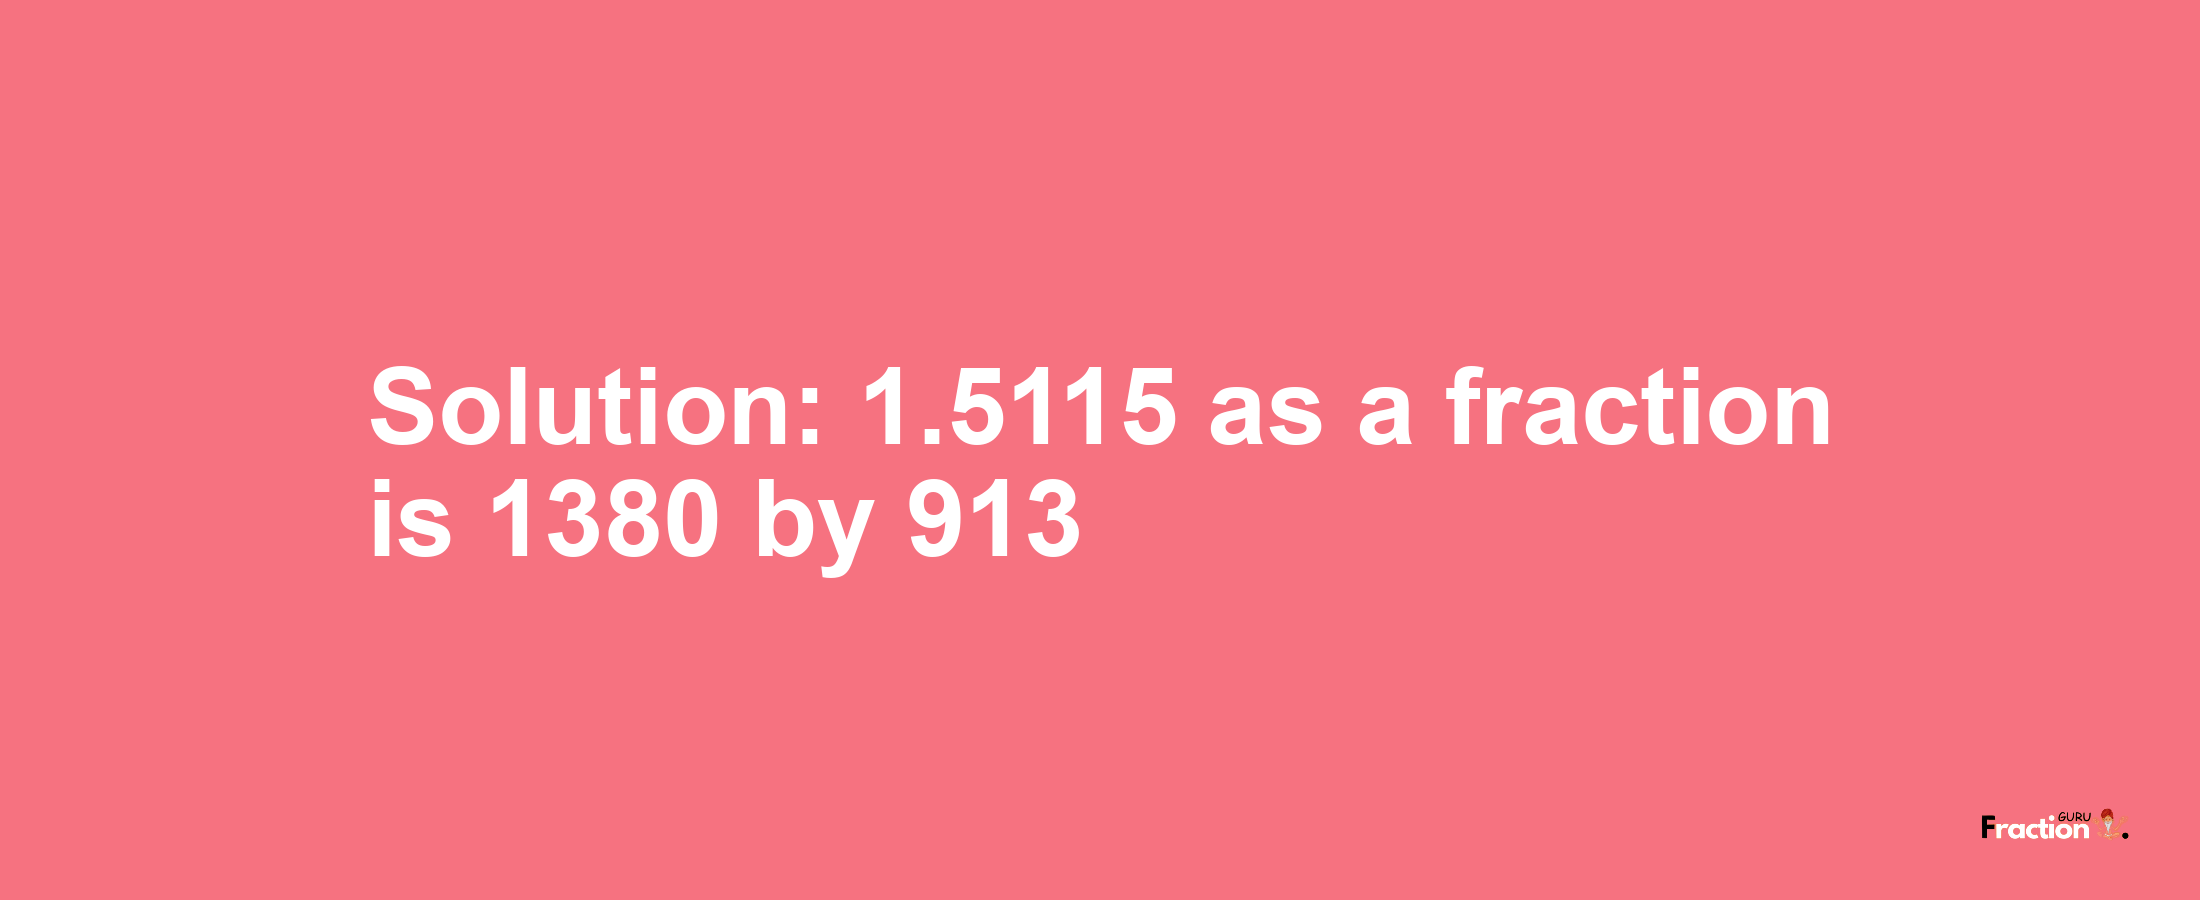 Solution:1.5115 as a fraction is 1380/913